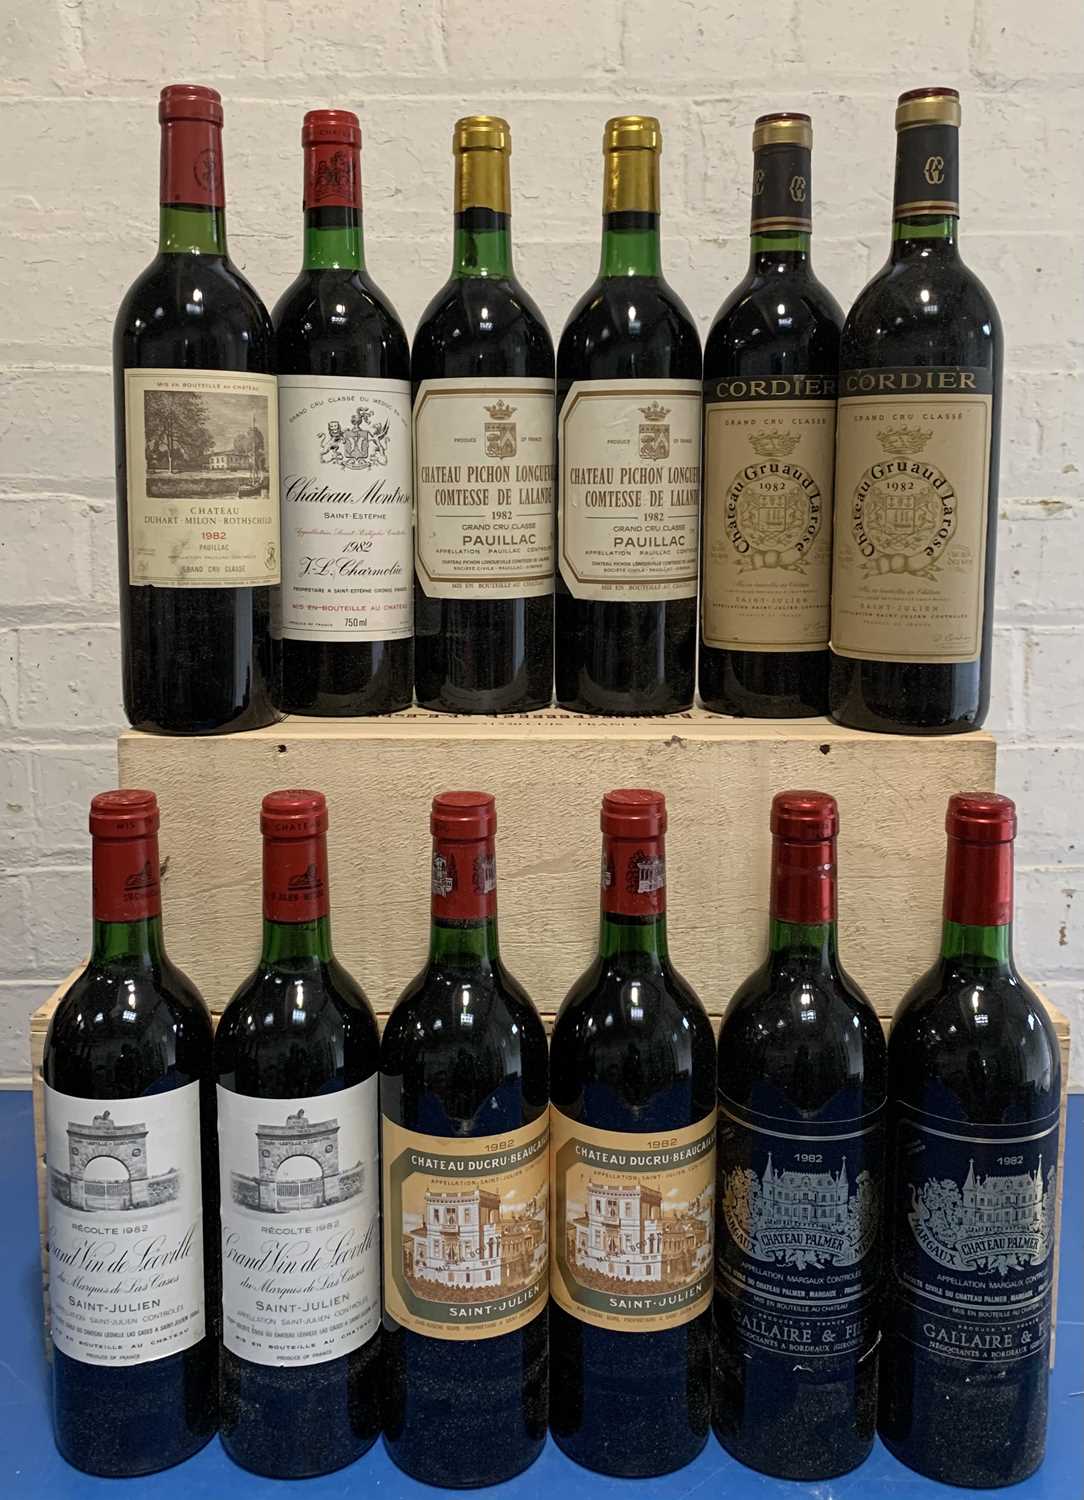 Lot 52 - 12 Bottles Mixed Parcel of some of the finest 1982 Classified Growth Clarets